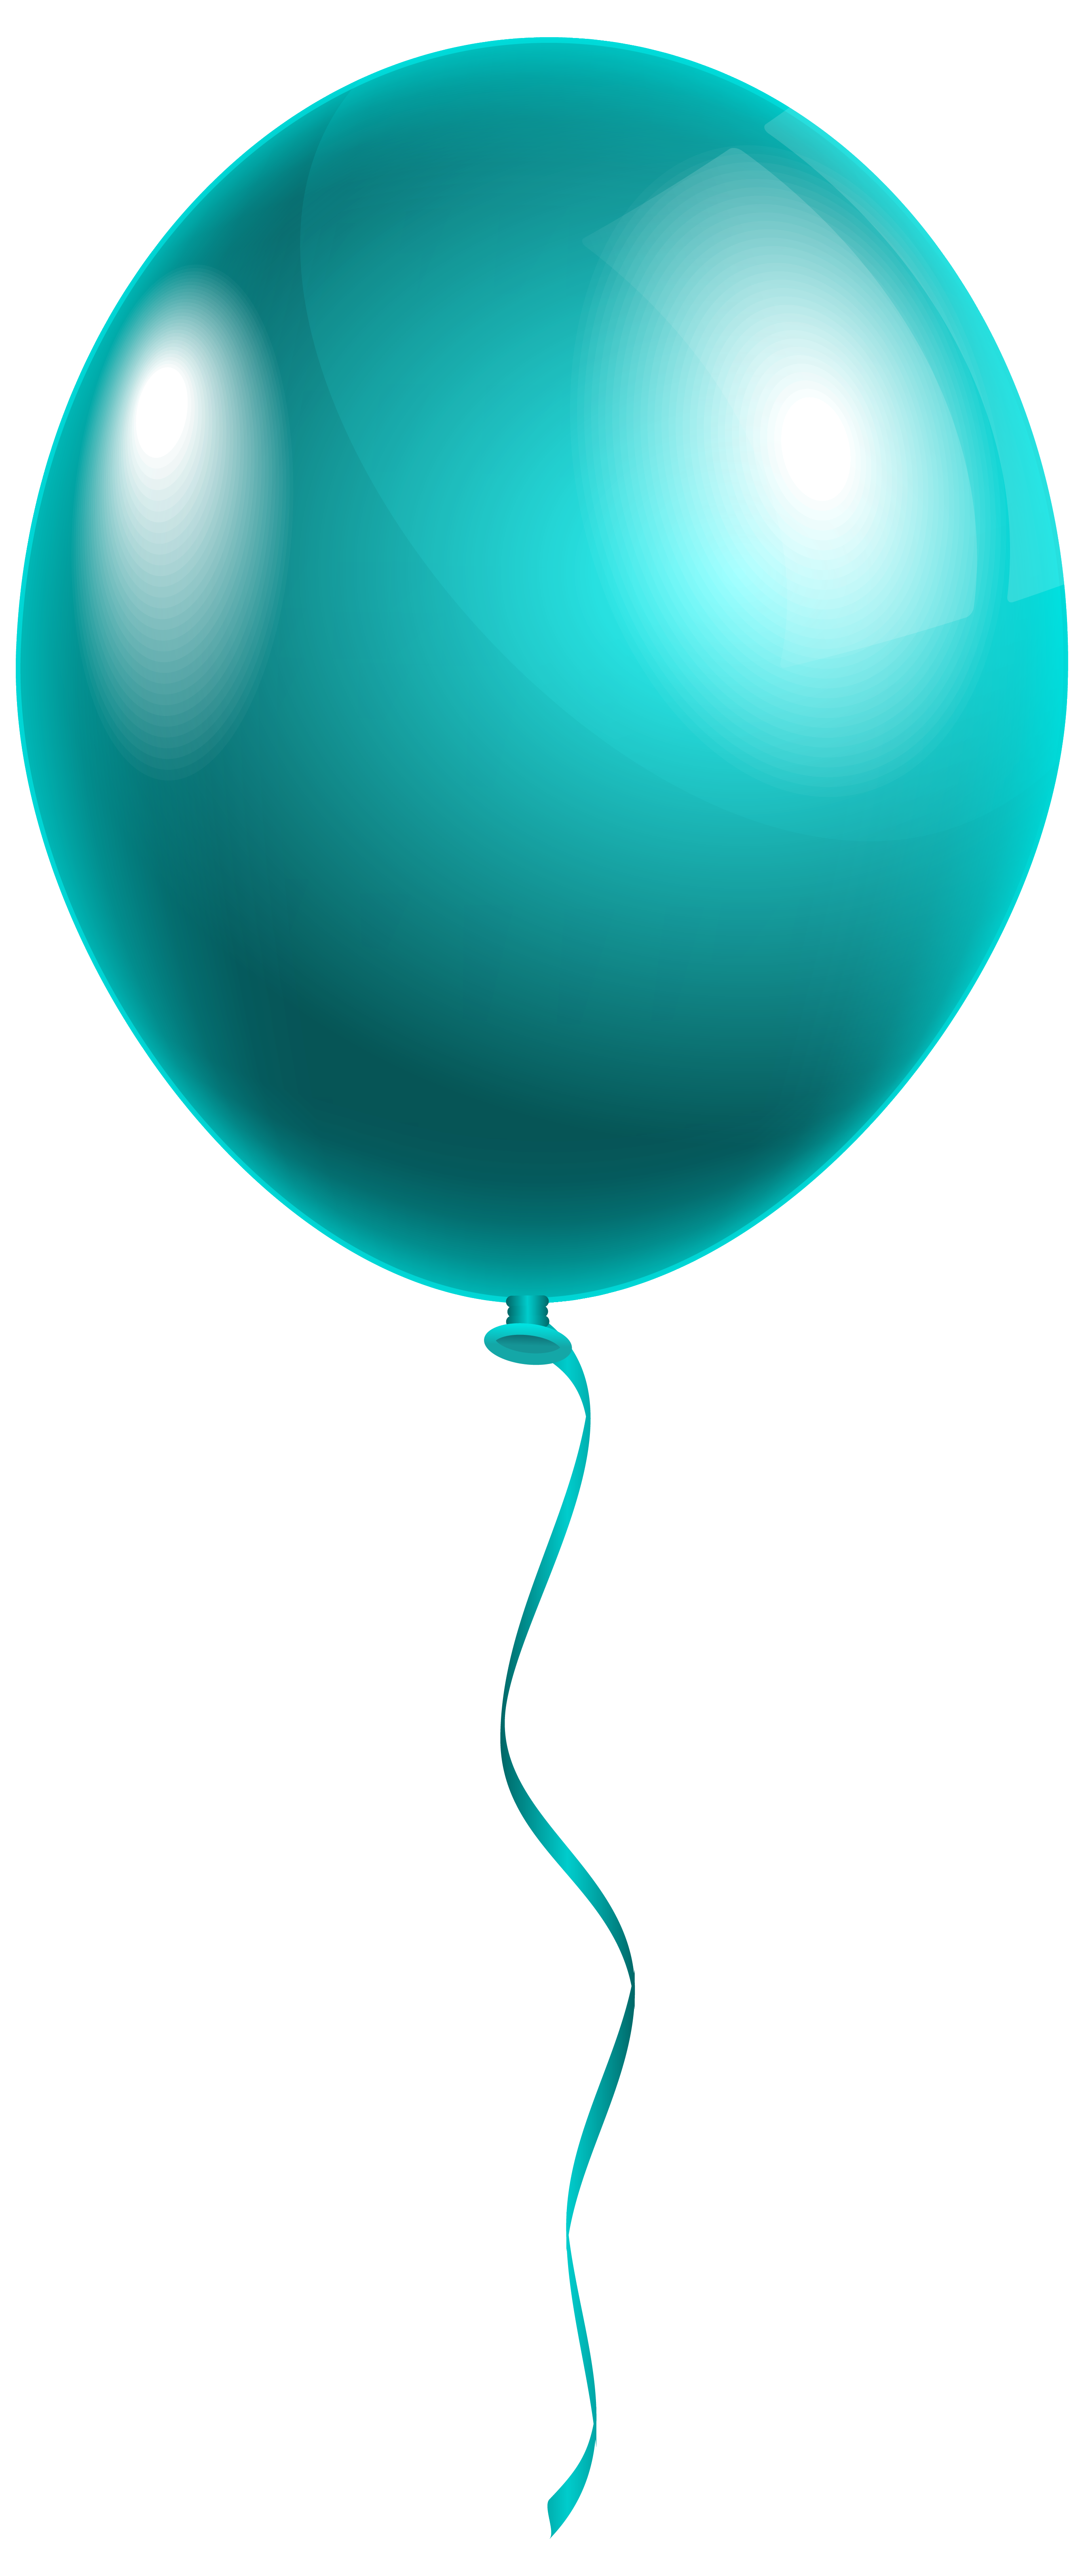 Single Modern Blue Balloon PNG Clipart Image